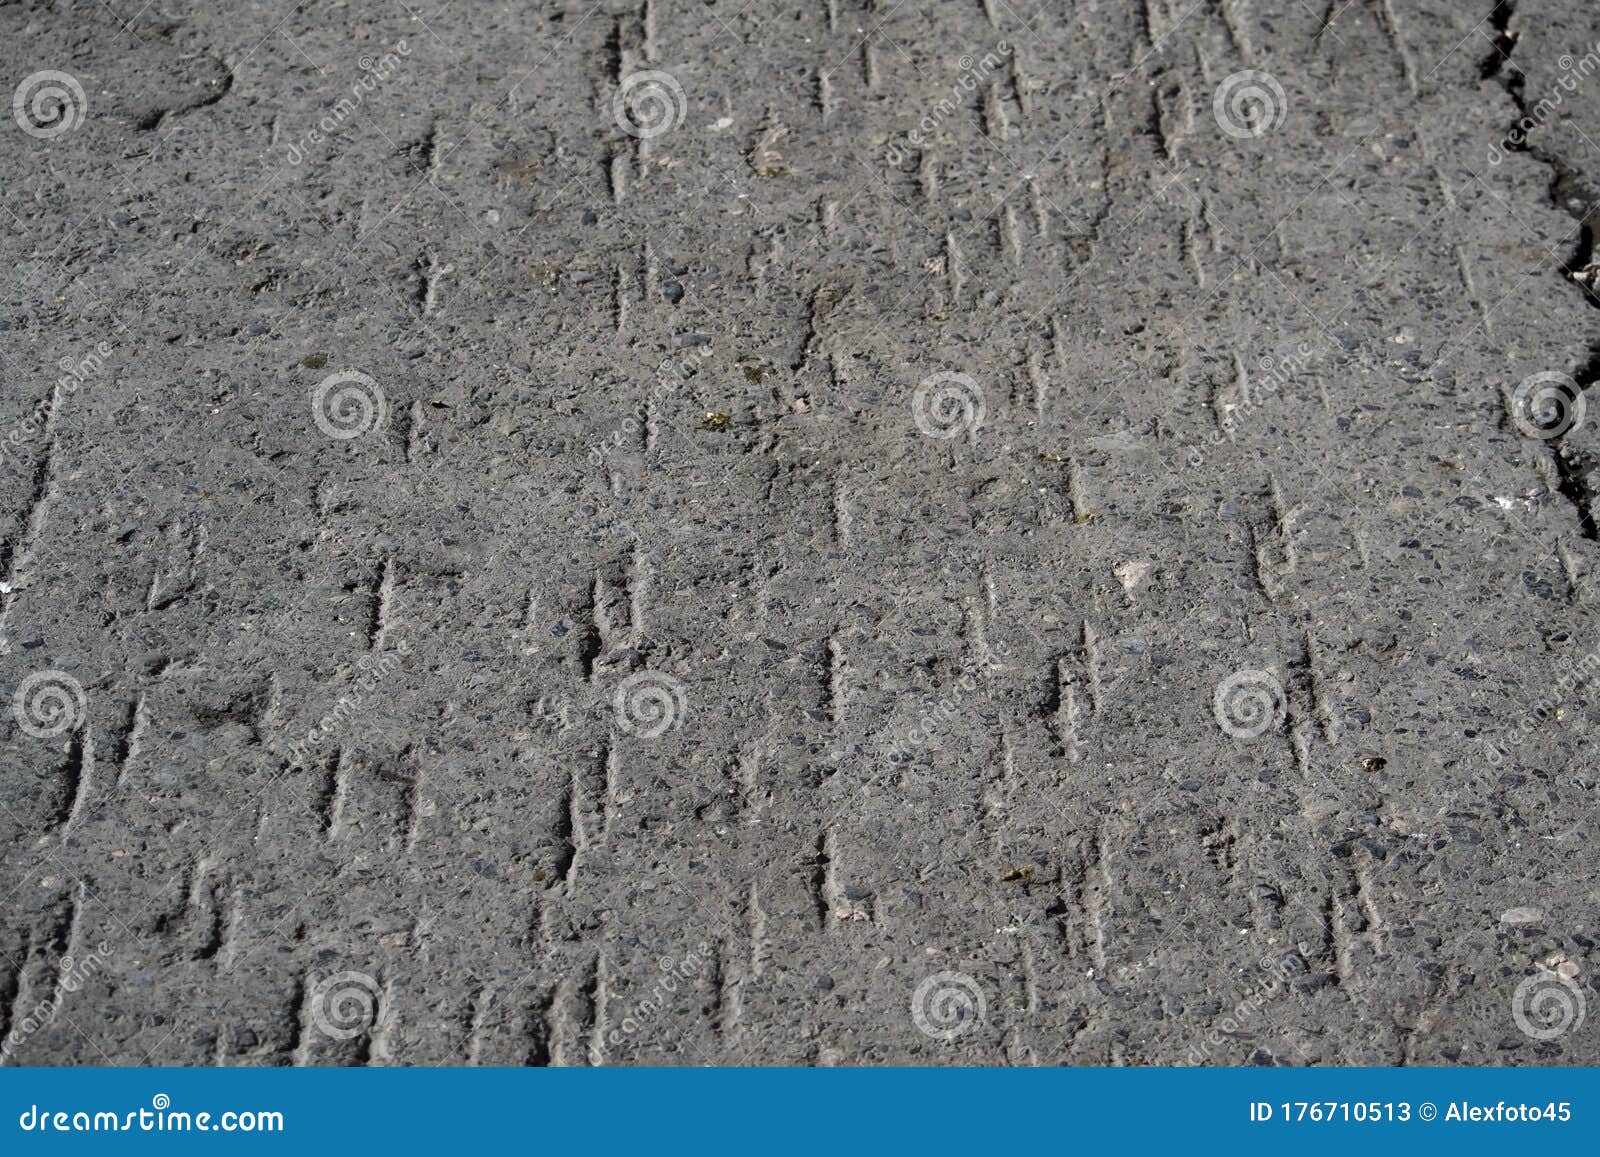 asphalt covered with flaws. photo background